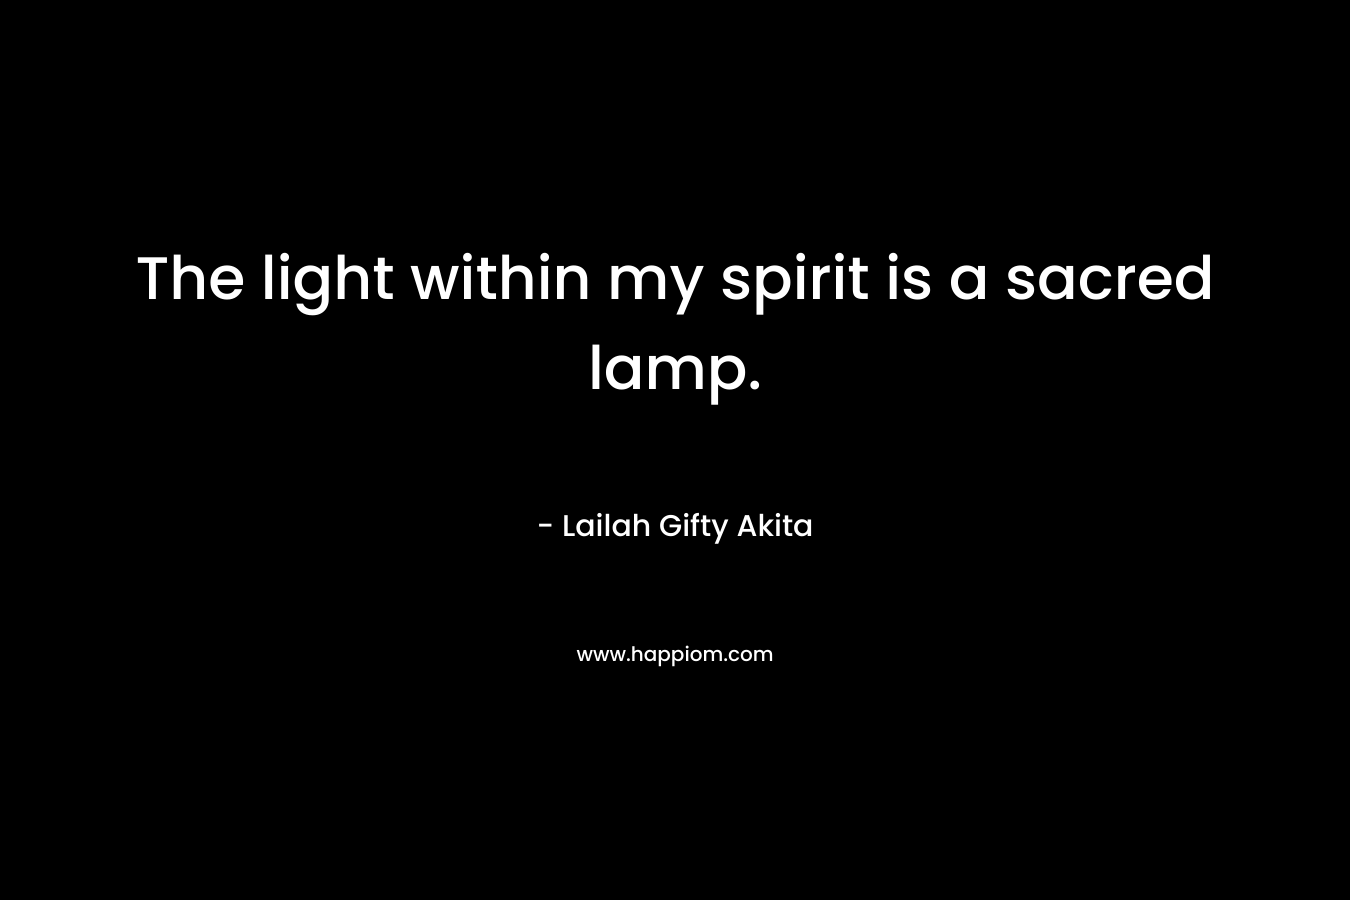 The light within my spirit is a sacred lamp.